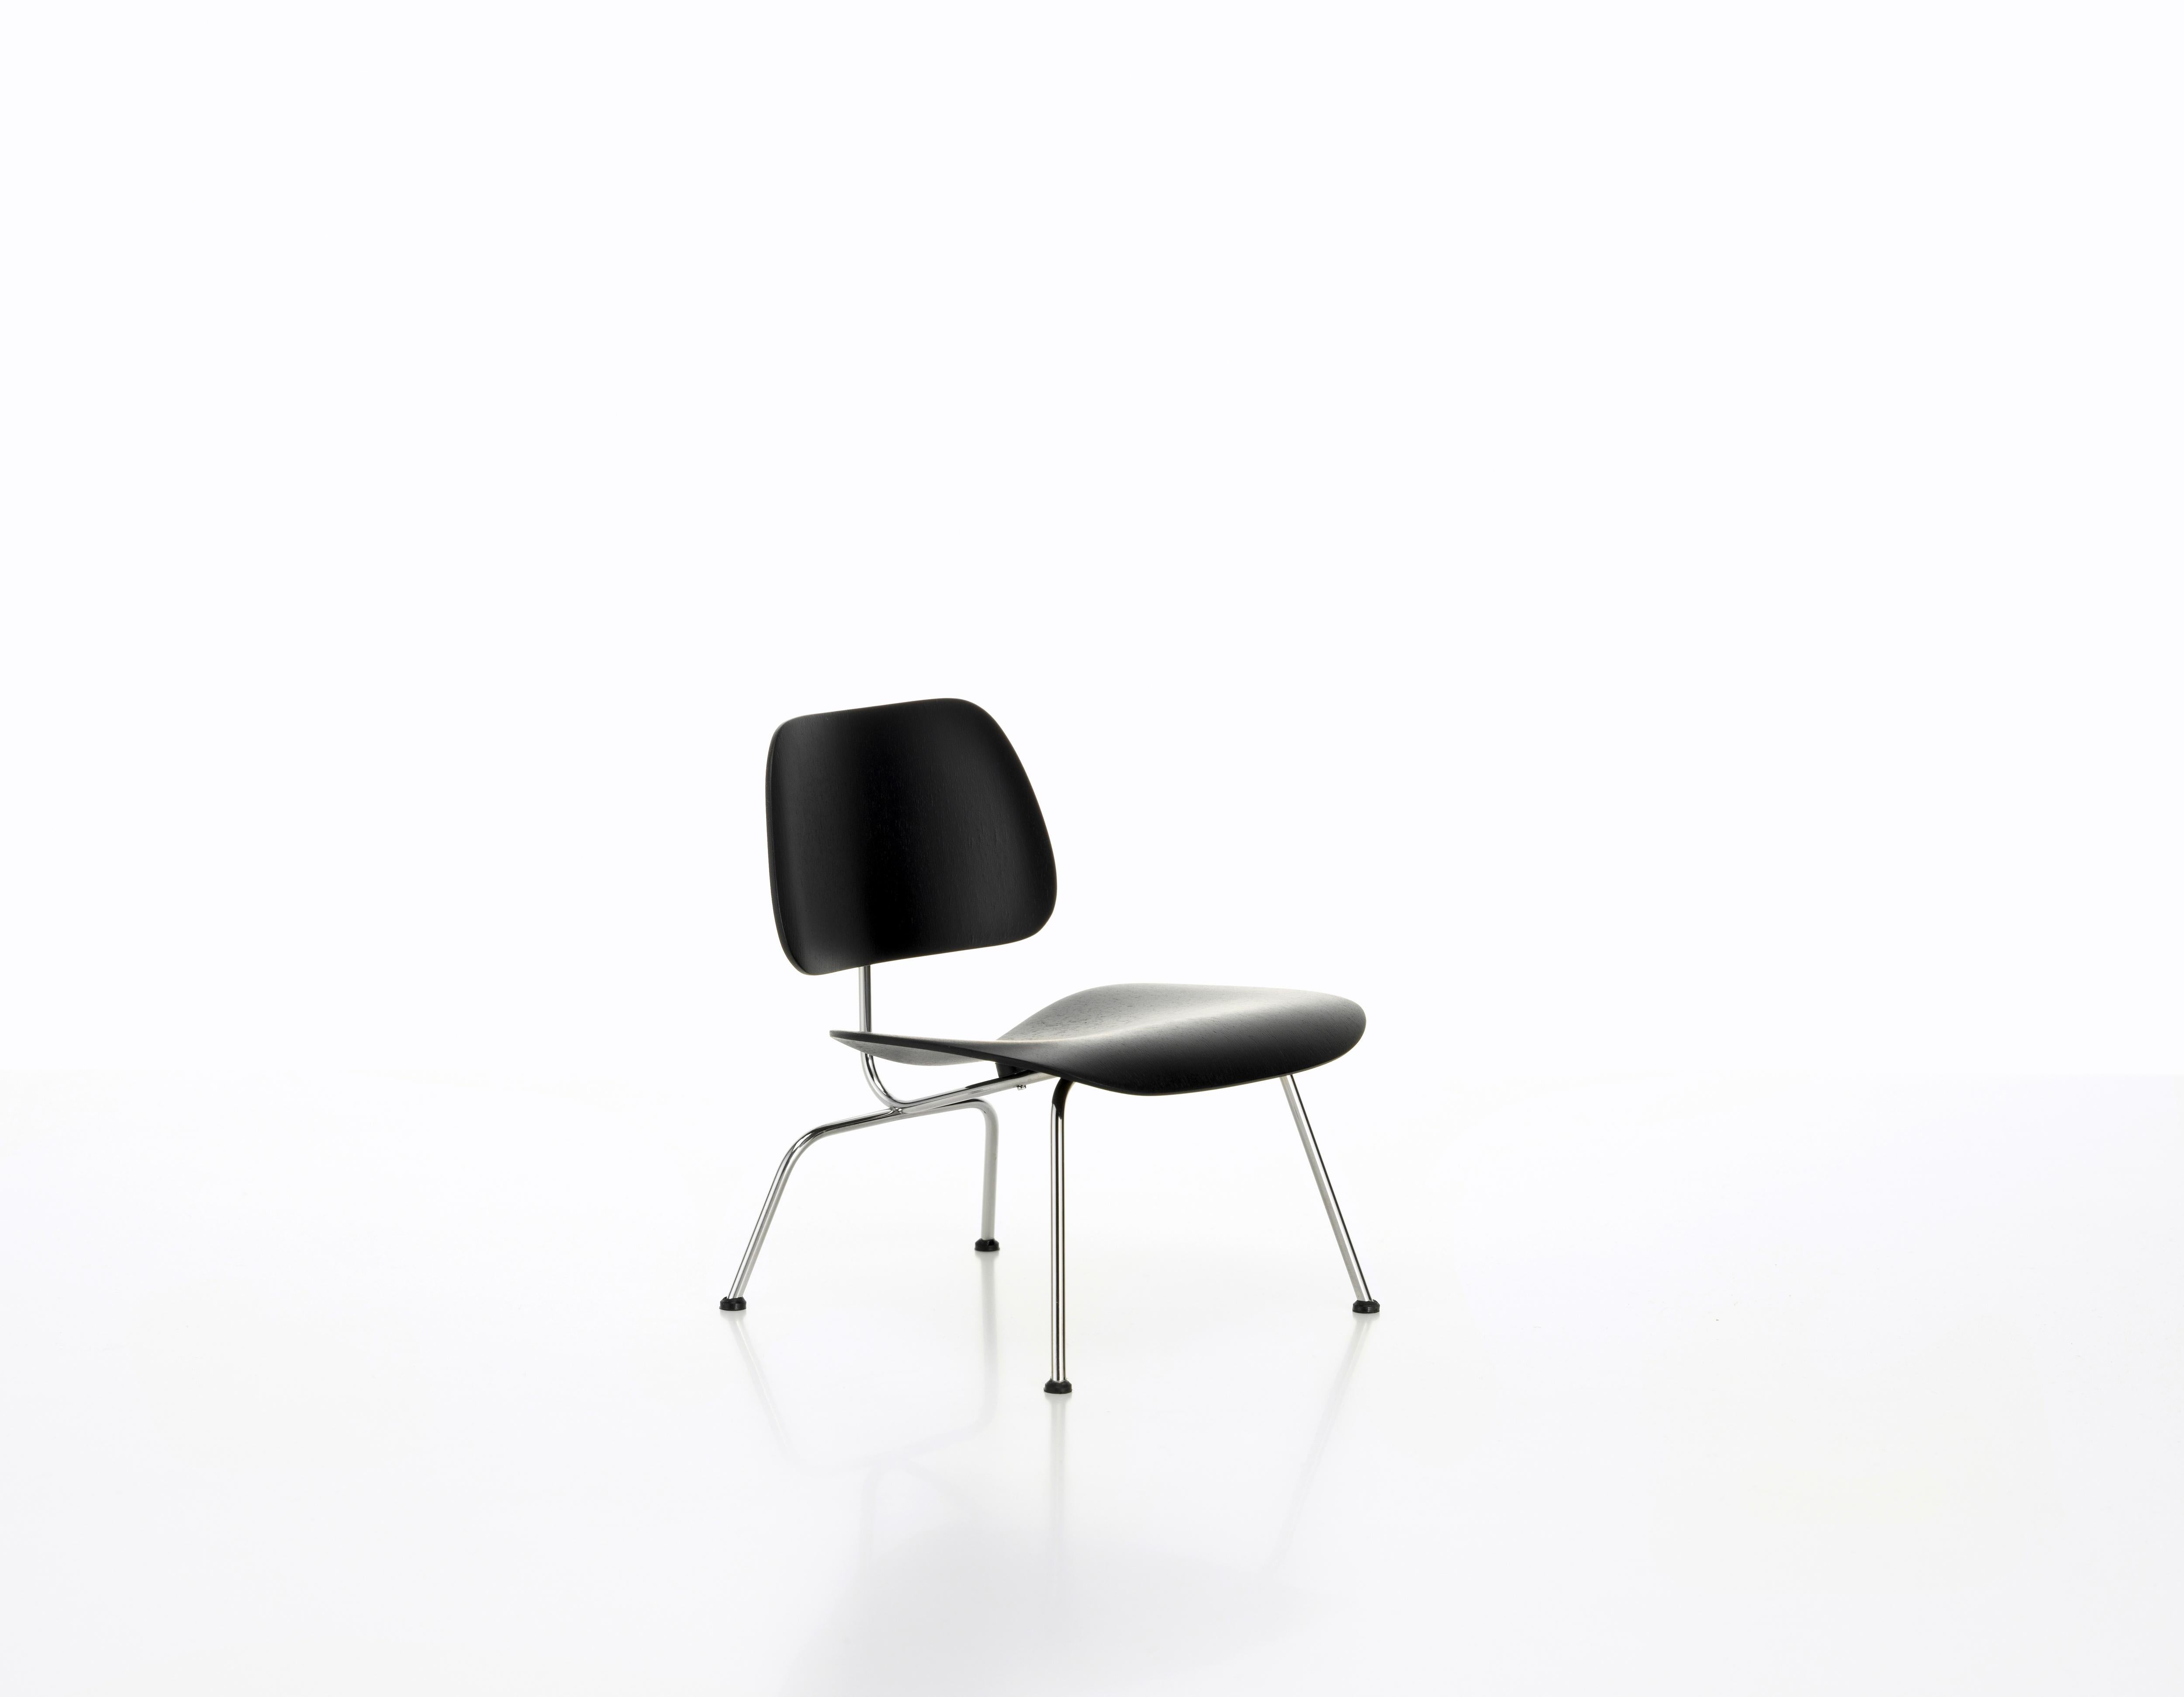 These items are currently only available in the United States.

Charles Eames and Eero Saarinen designed a chair in 1940 with a new type of three-dimensional preshaped plywood seat for a competition held by the New York Museum of Modern Art. The